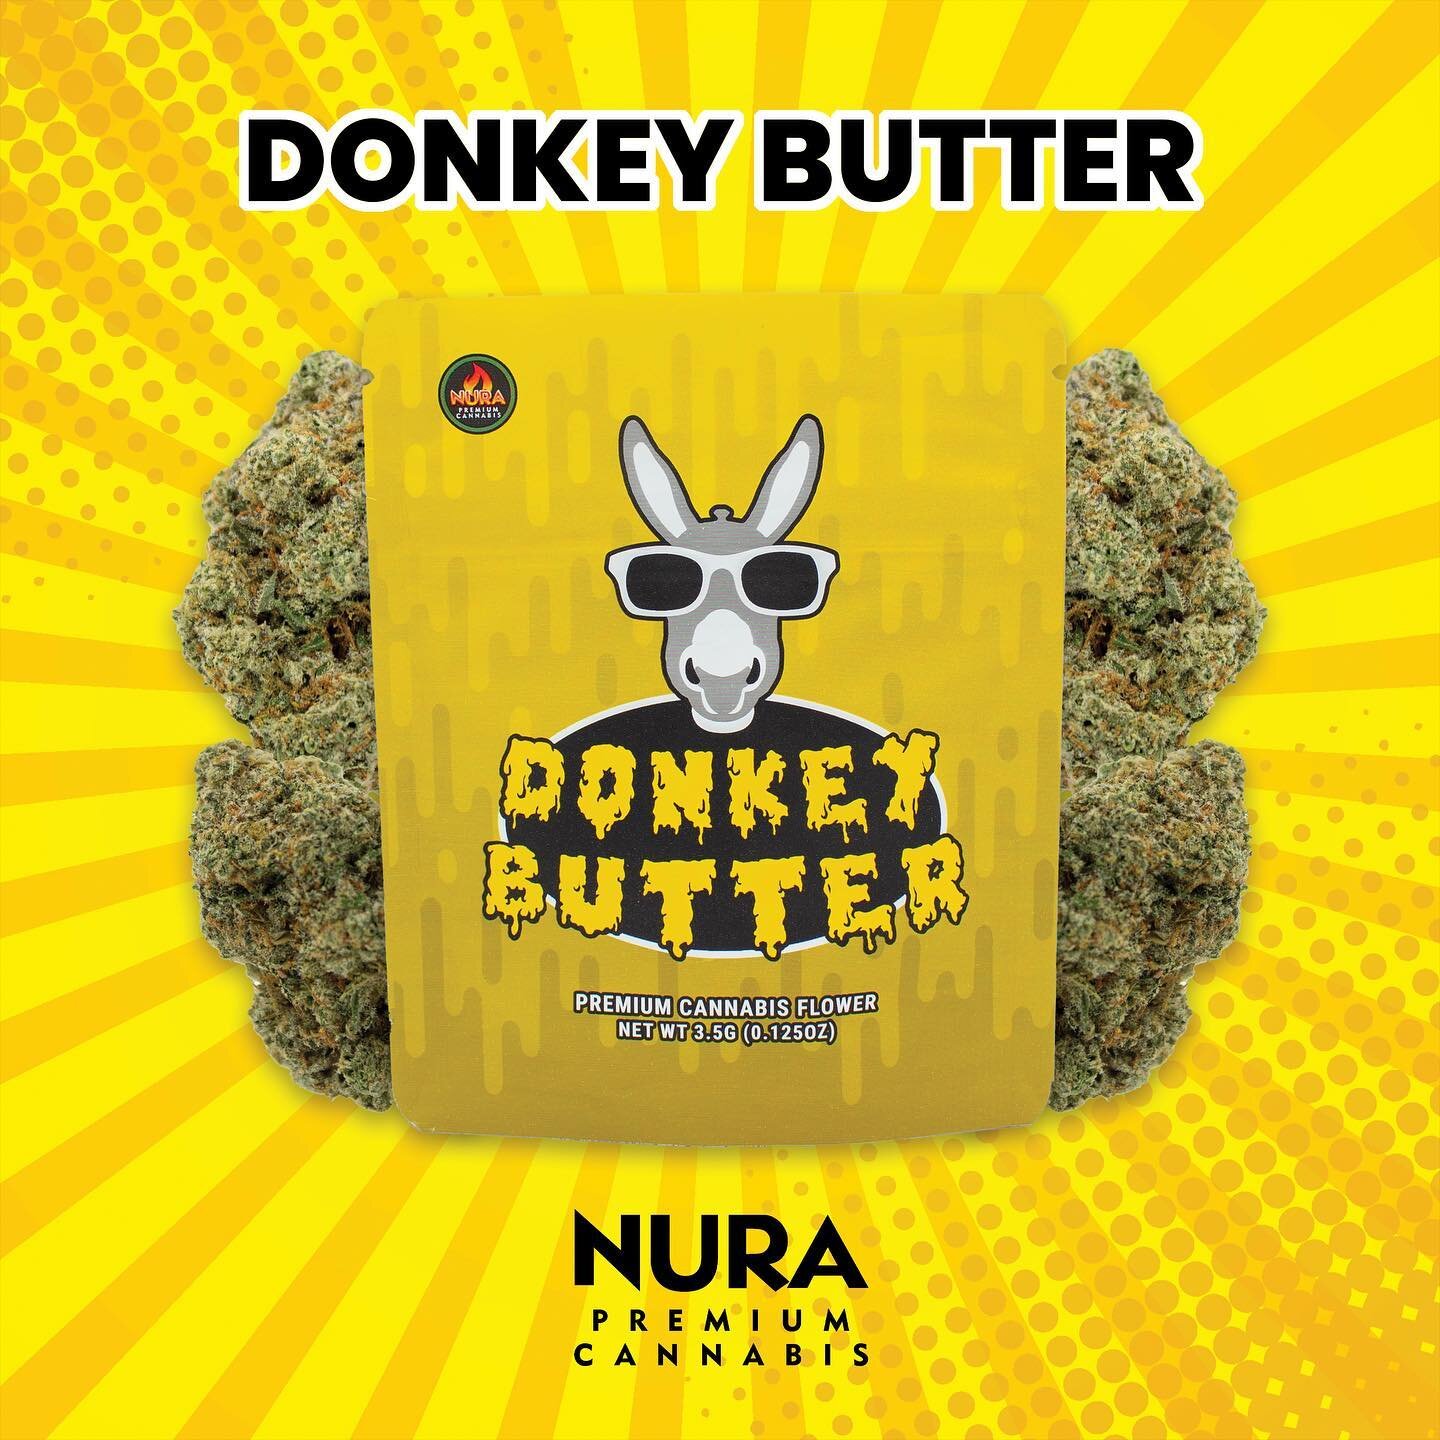 Our latest roster addition has a bit of a kick!

🧈 Donkey Butter 🧈

NOTHING FOR SALE. EDUCATIONAL PURPOSES ONLY.